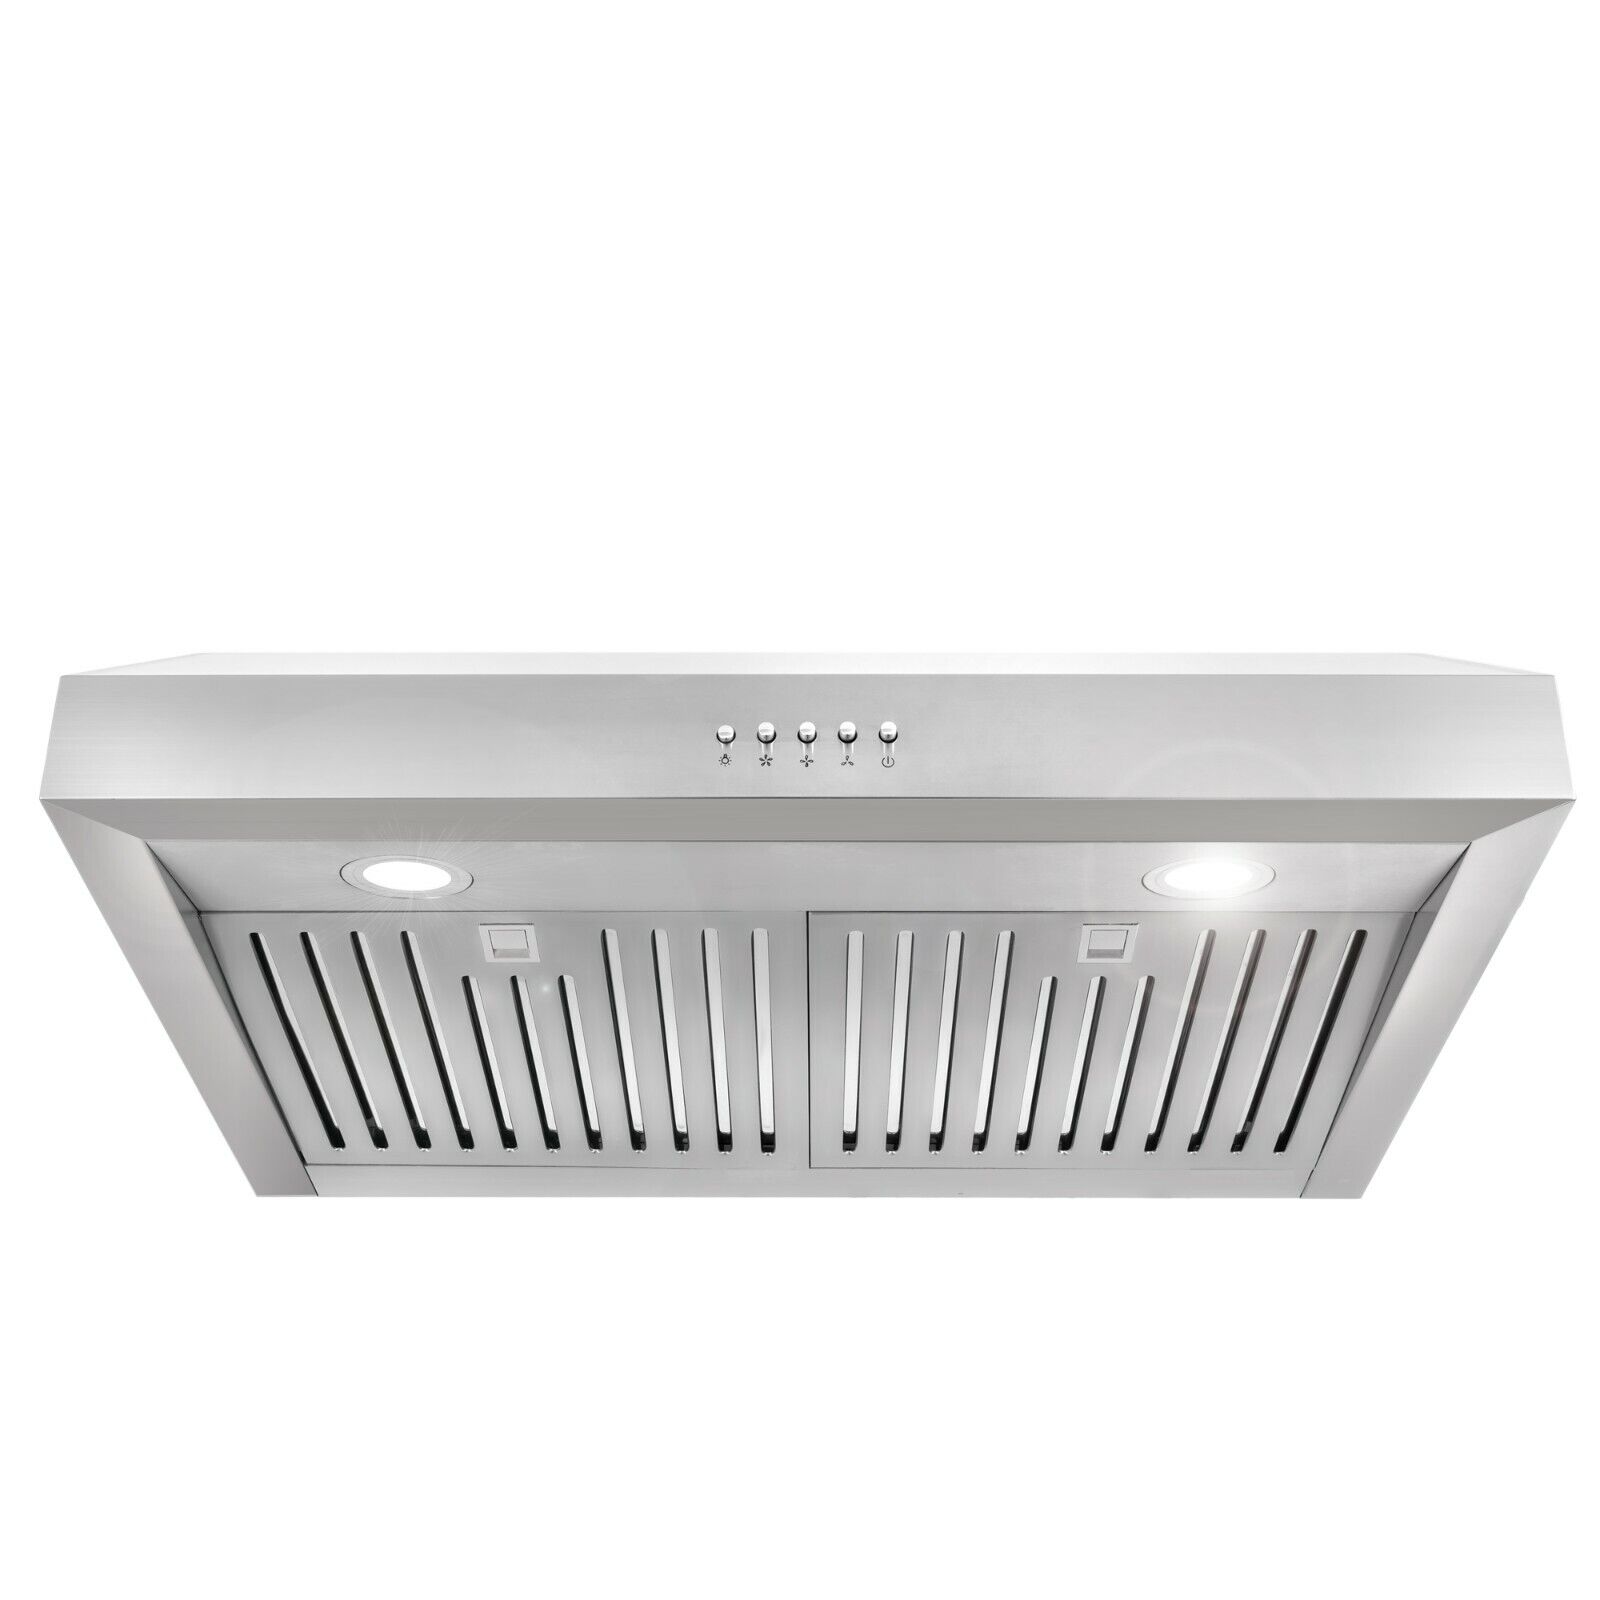 30 In Under Cabinet Range Hood (open Box) Stainless Steel Permanent Filters, Led